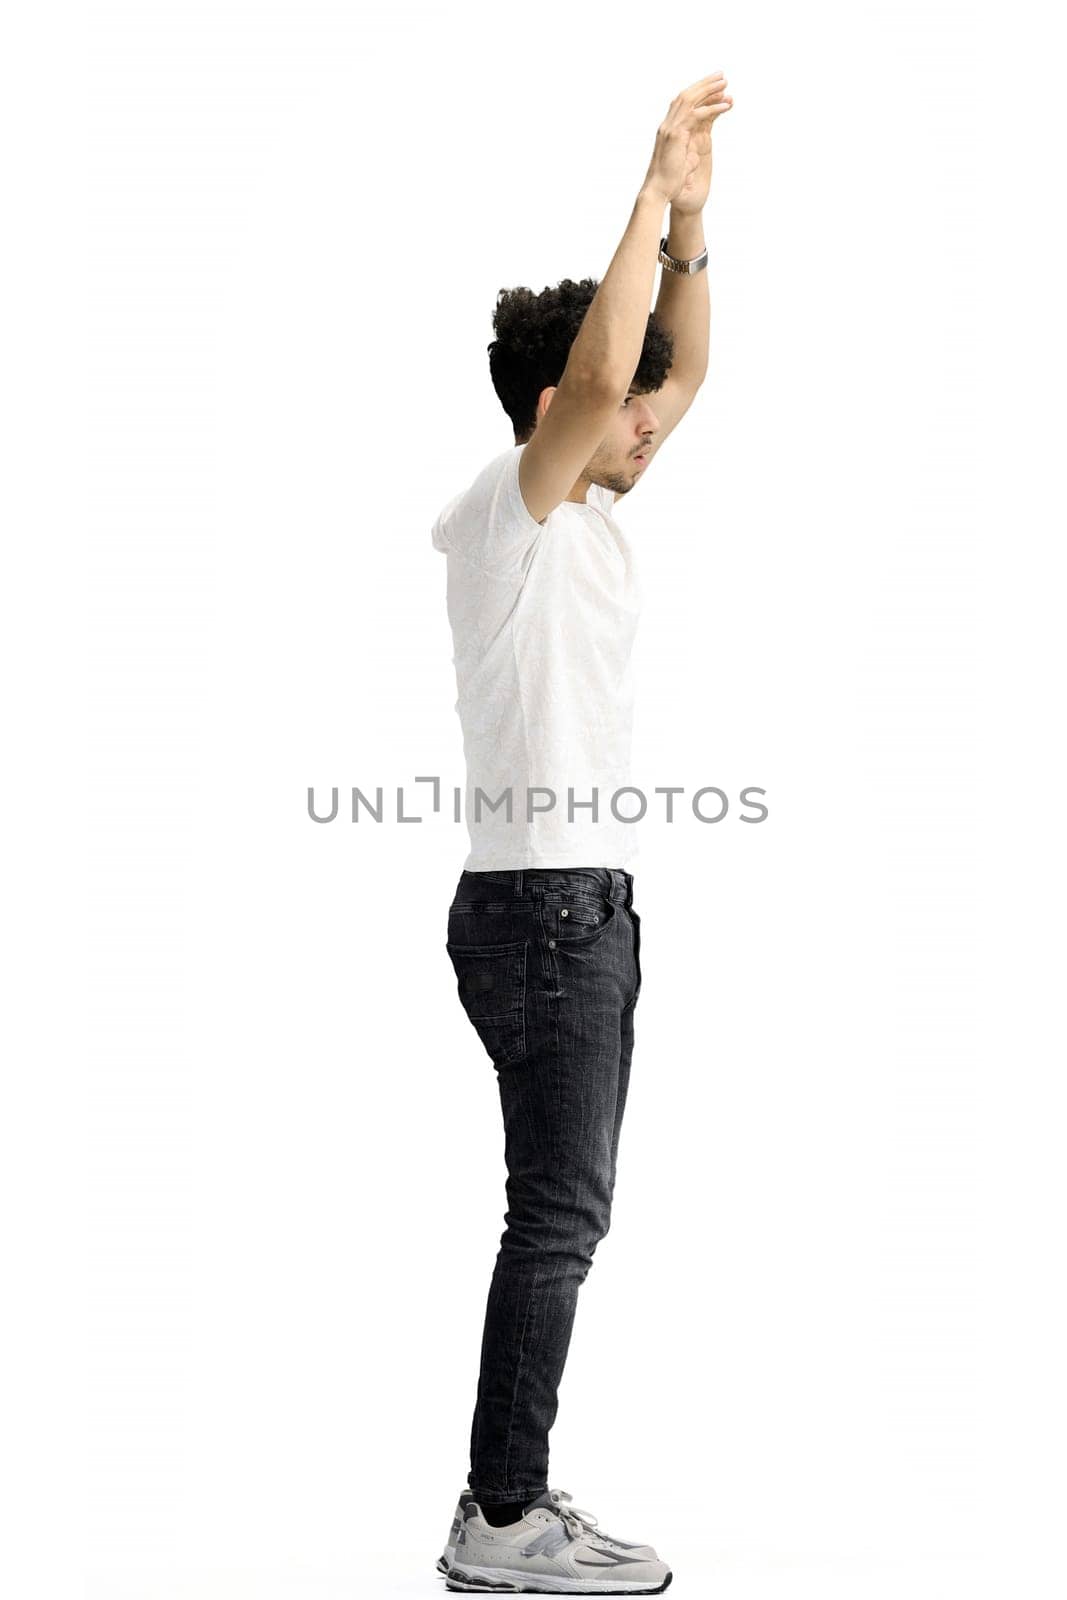 A man, on a white background, in full height, waving his arms by Prosto